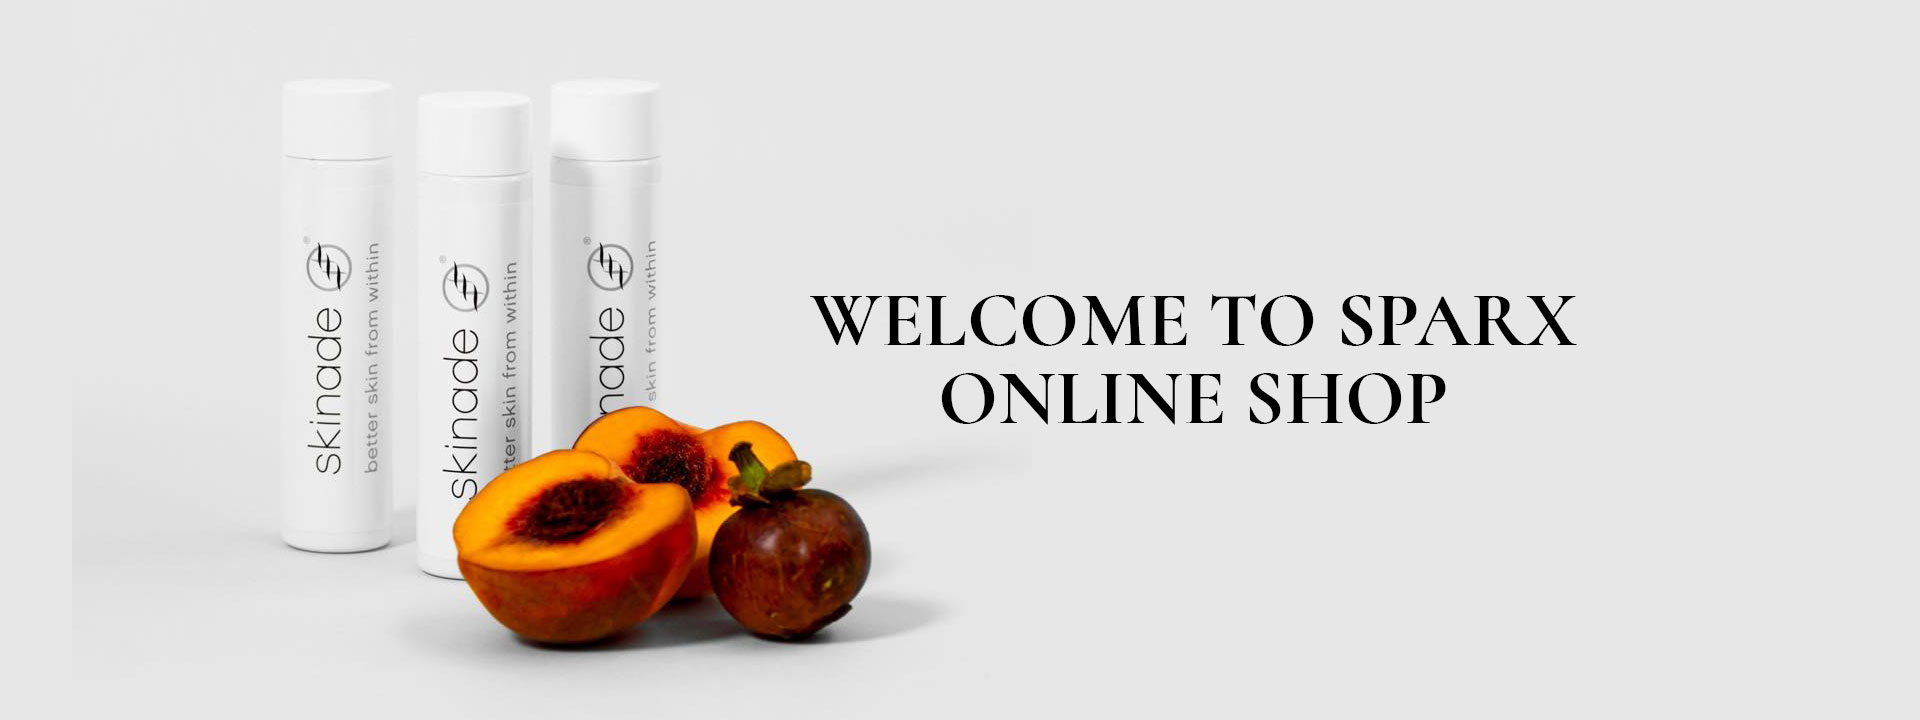 Welcome to Sparx Online Shop banner